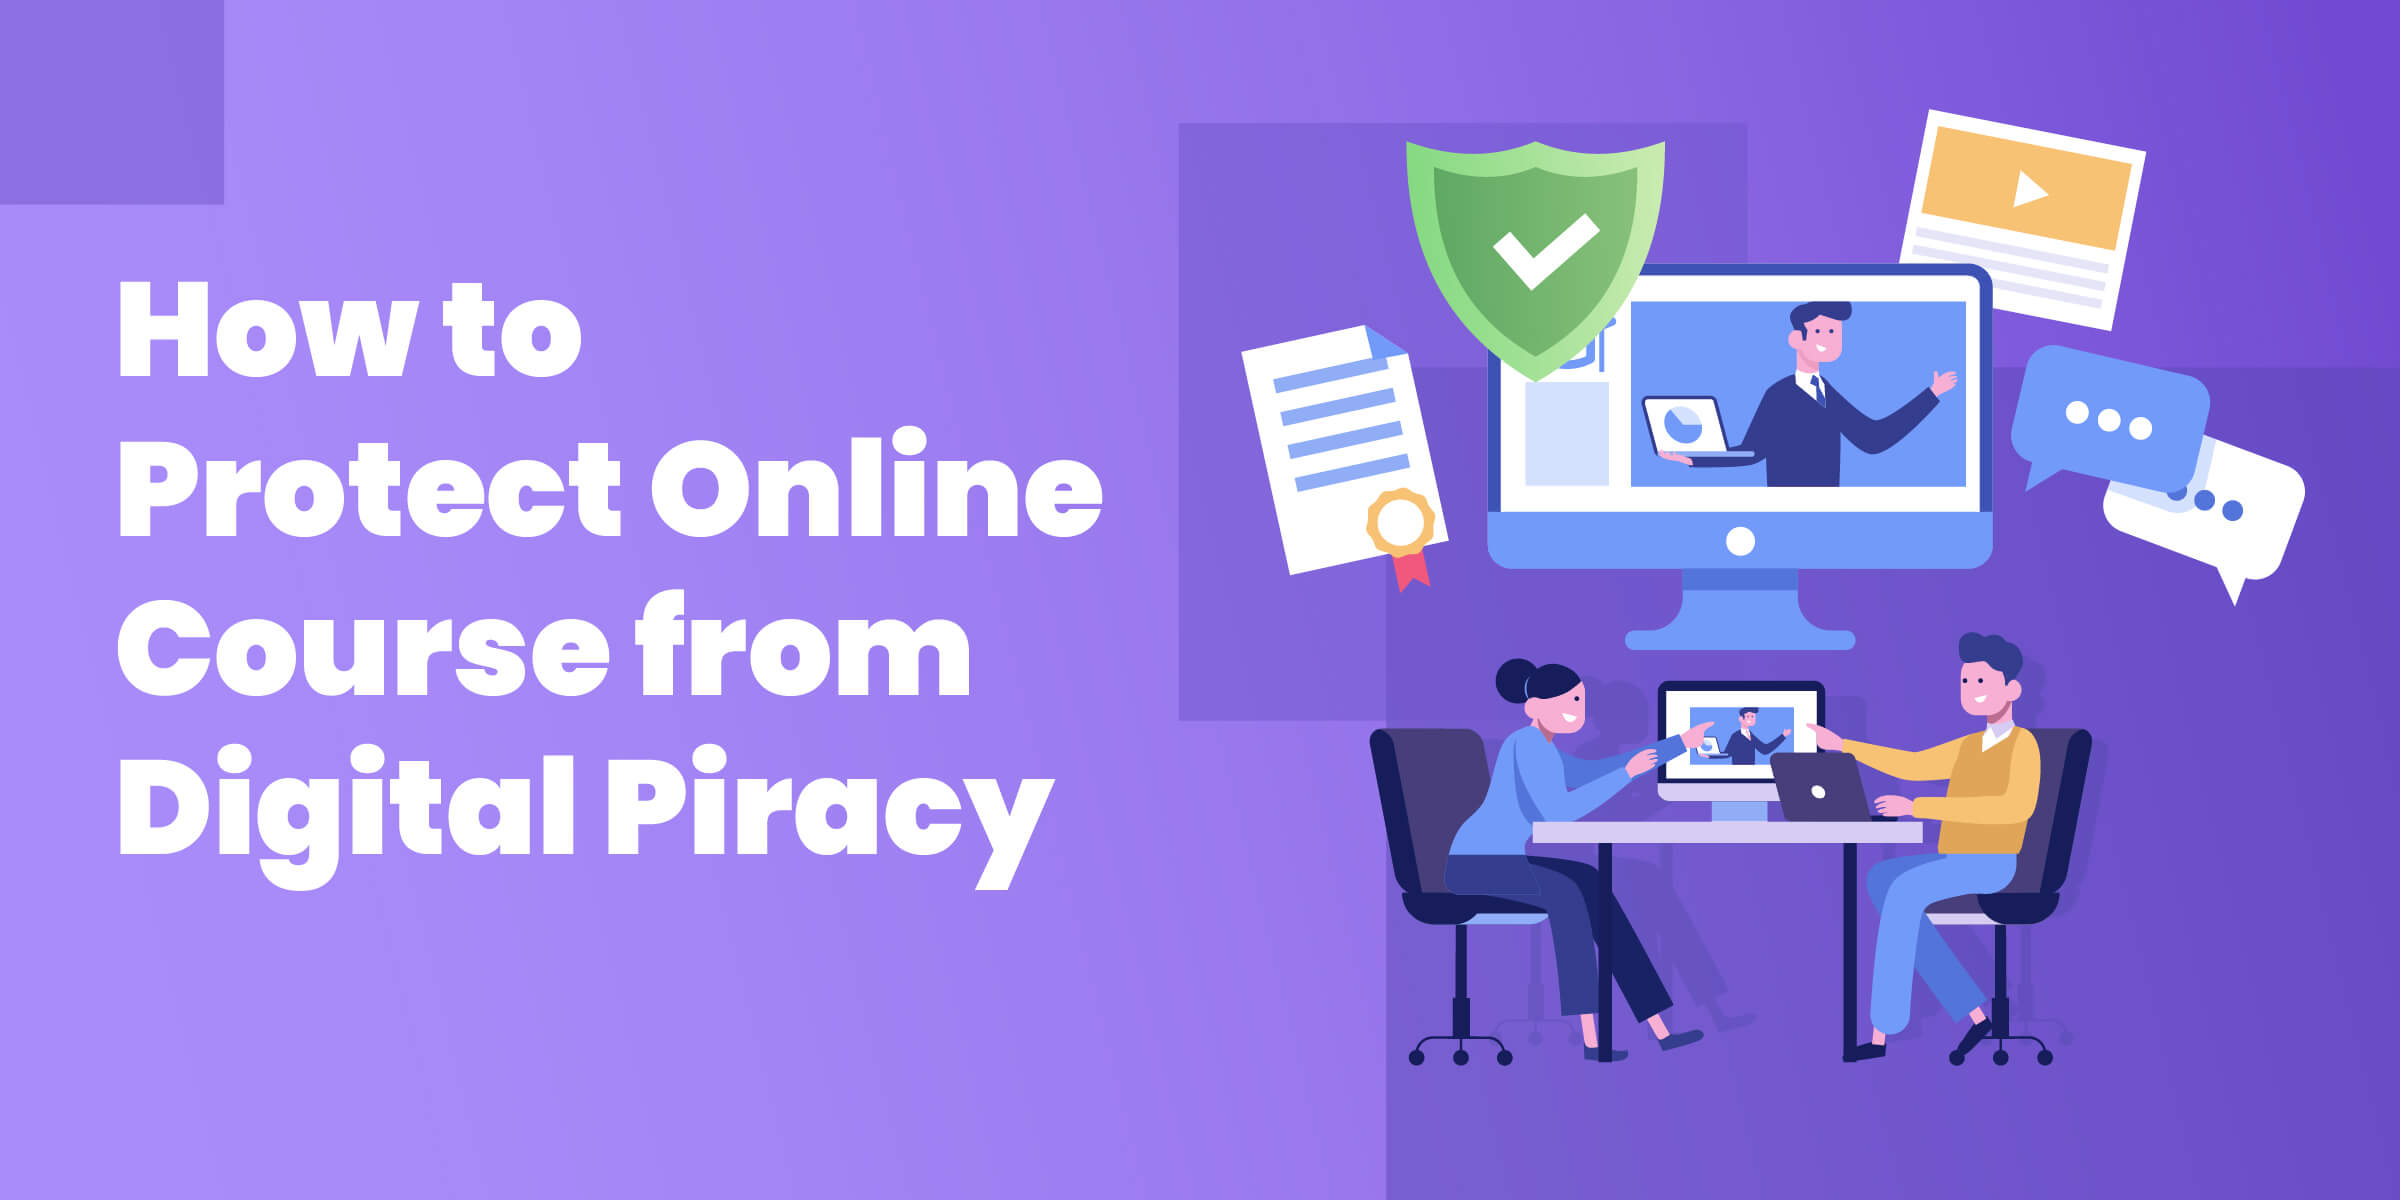 How to Protect Online Course from Piracy